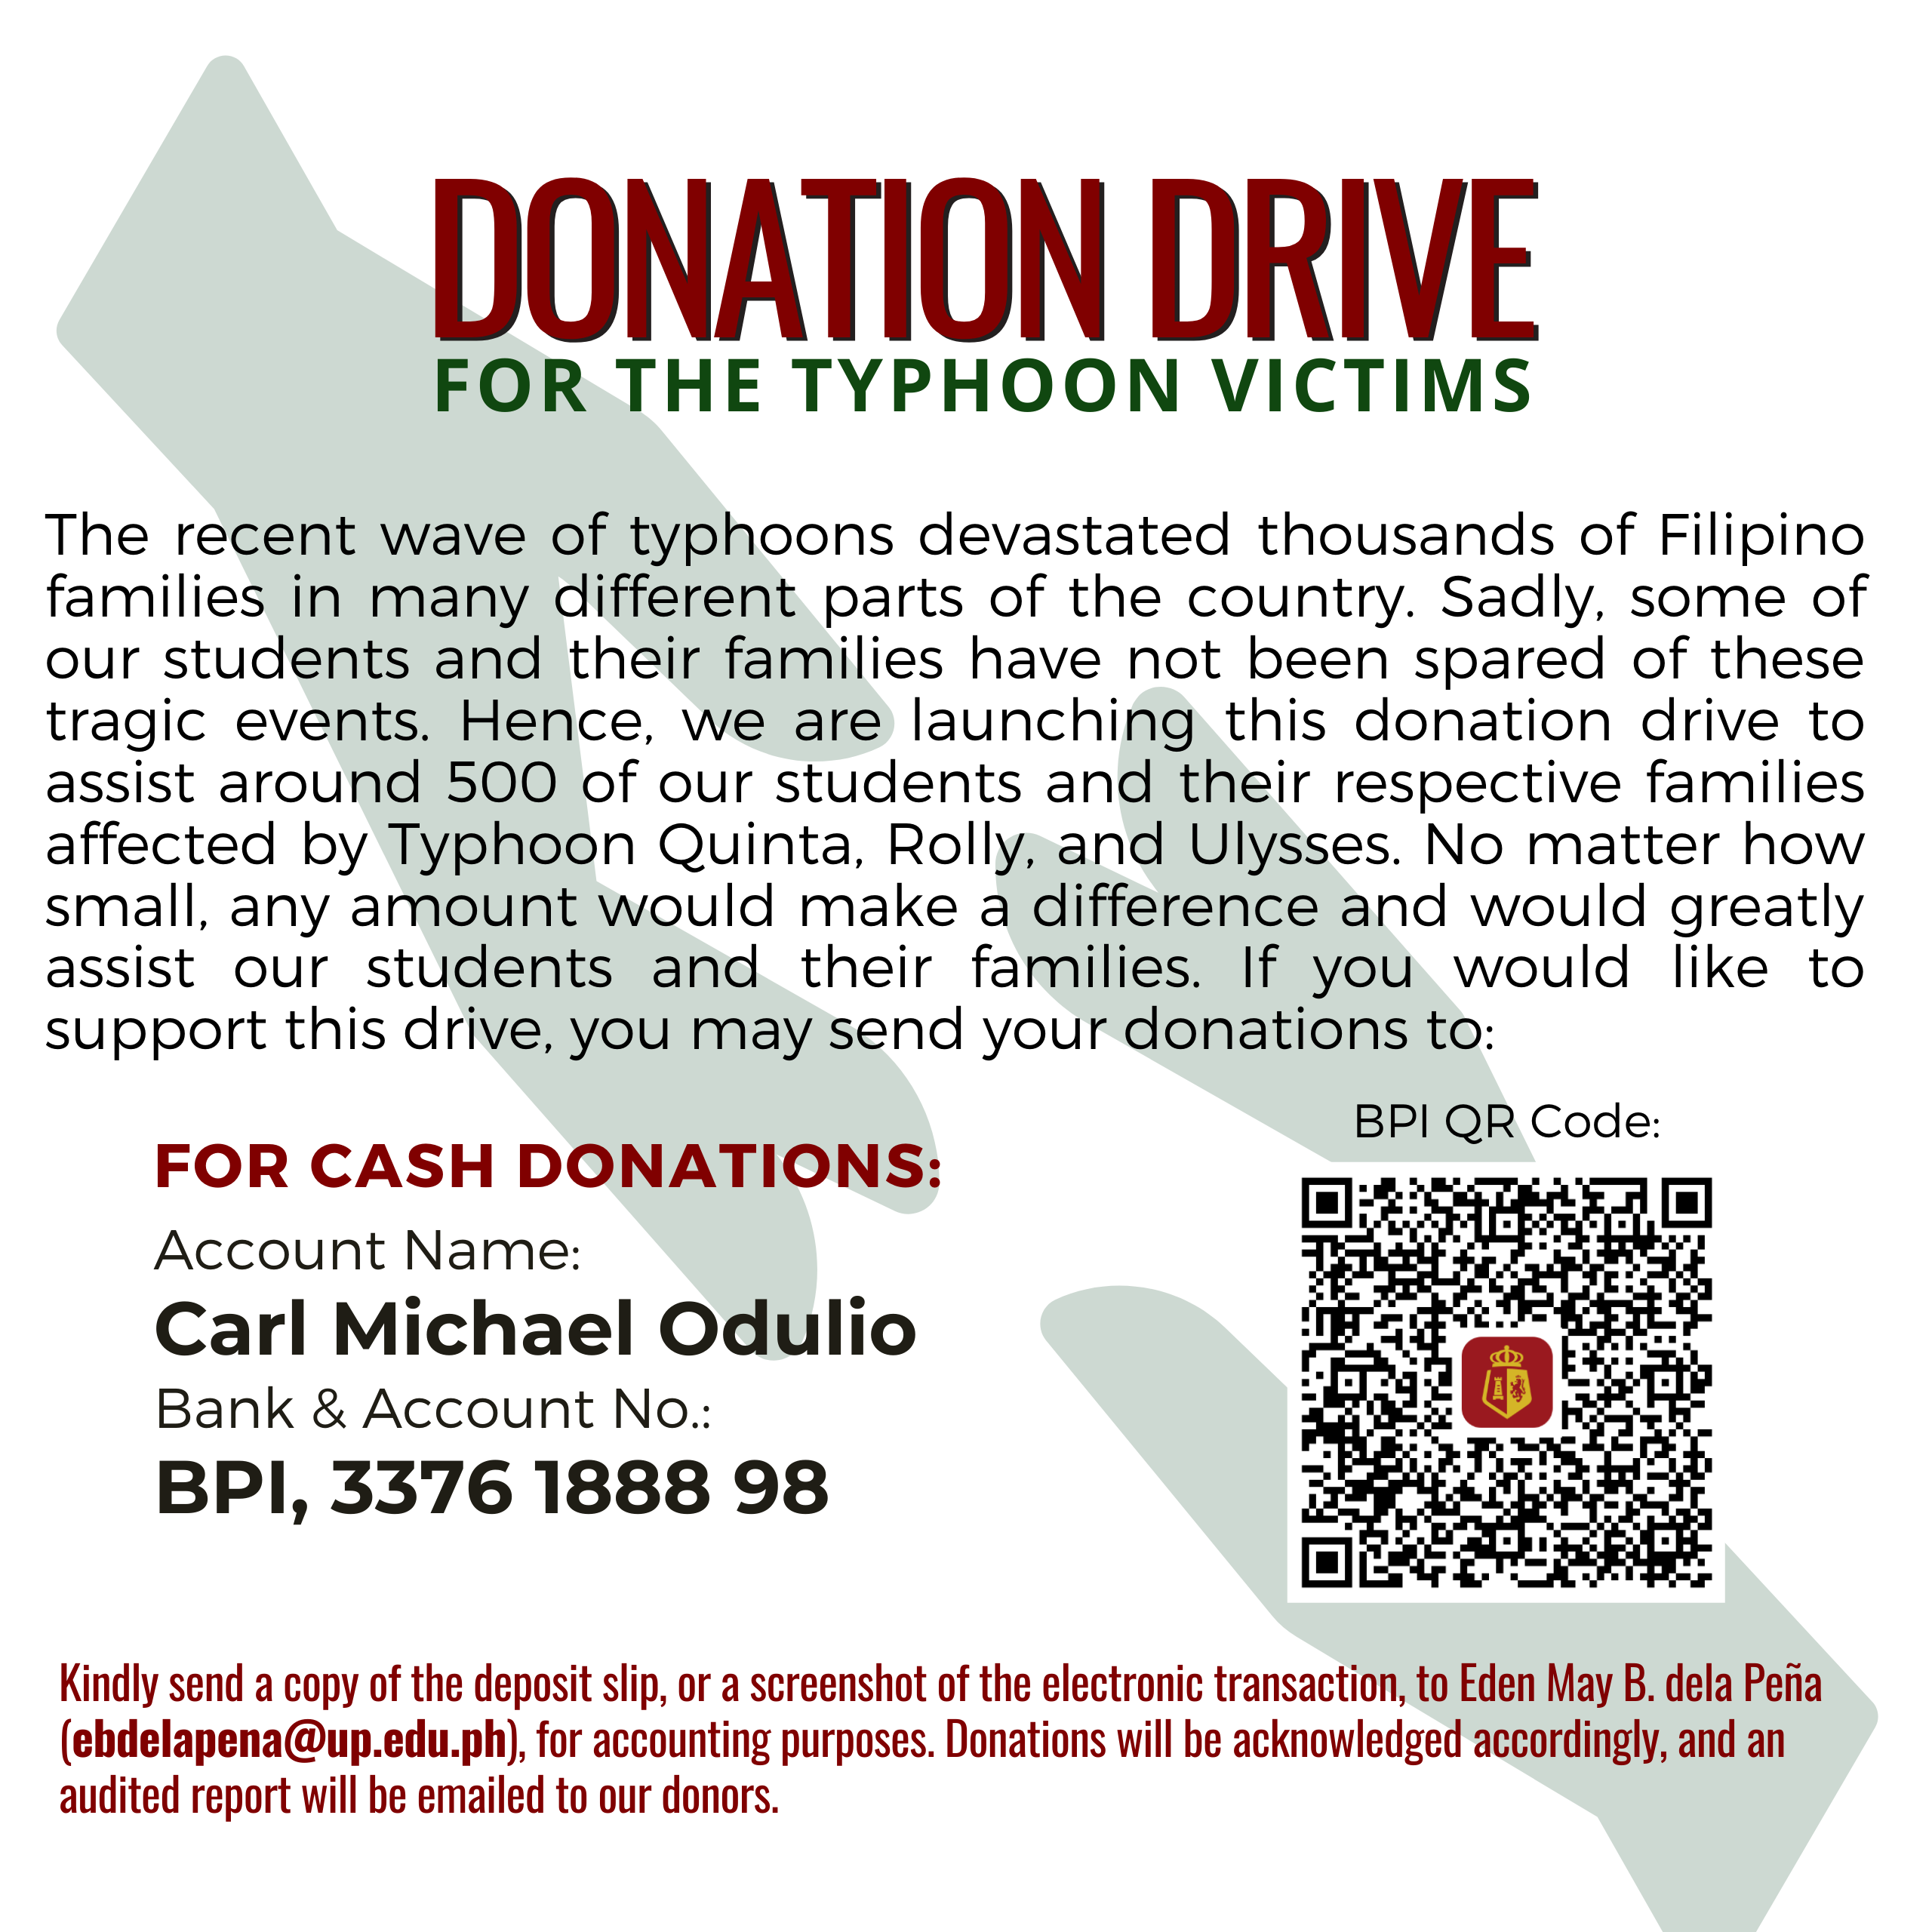 Donation Drive for Typhoon Victims